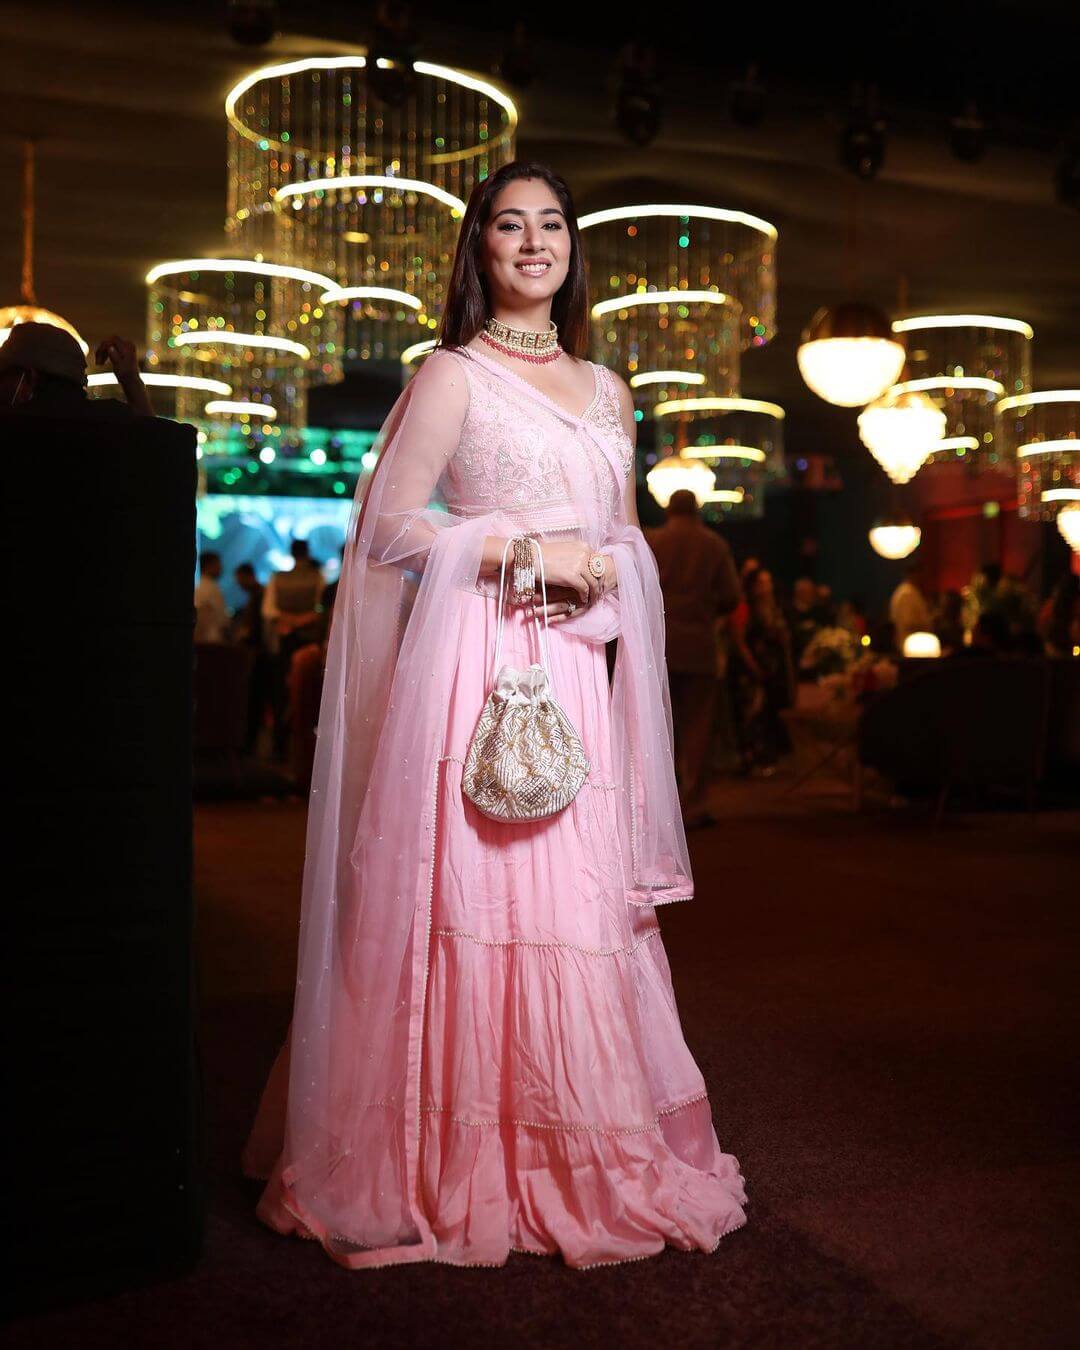 Disha Look Stunning In Pink Lehenga Outfit Disha Parmar Amazing Outfit And Looks